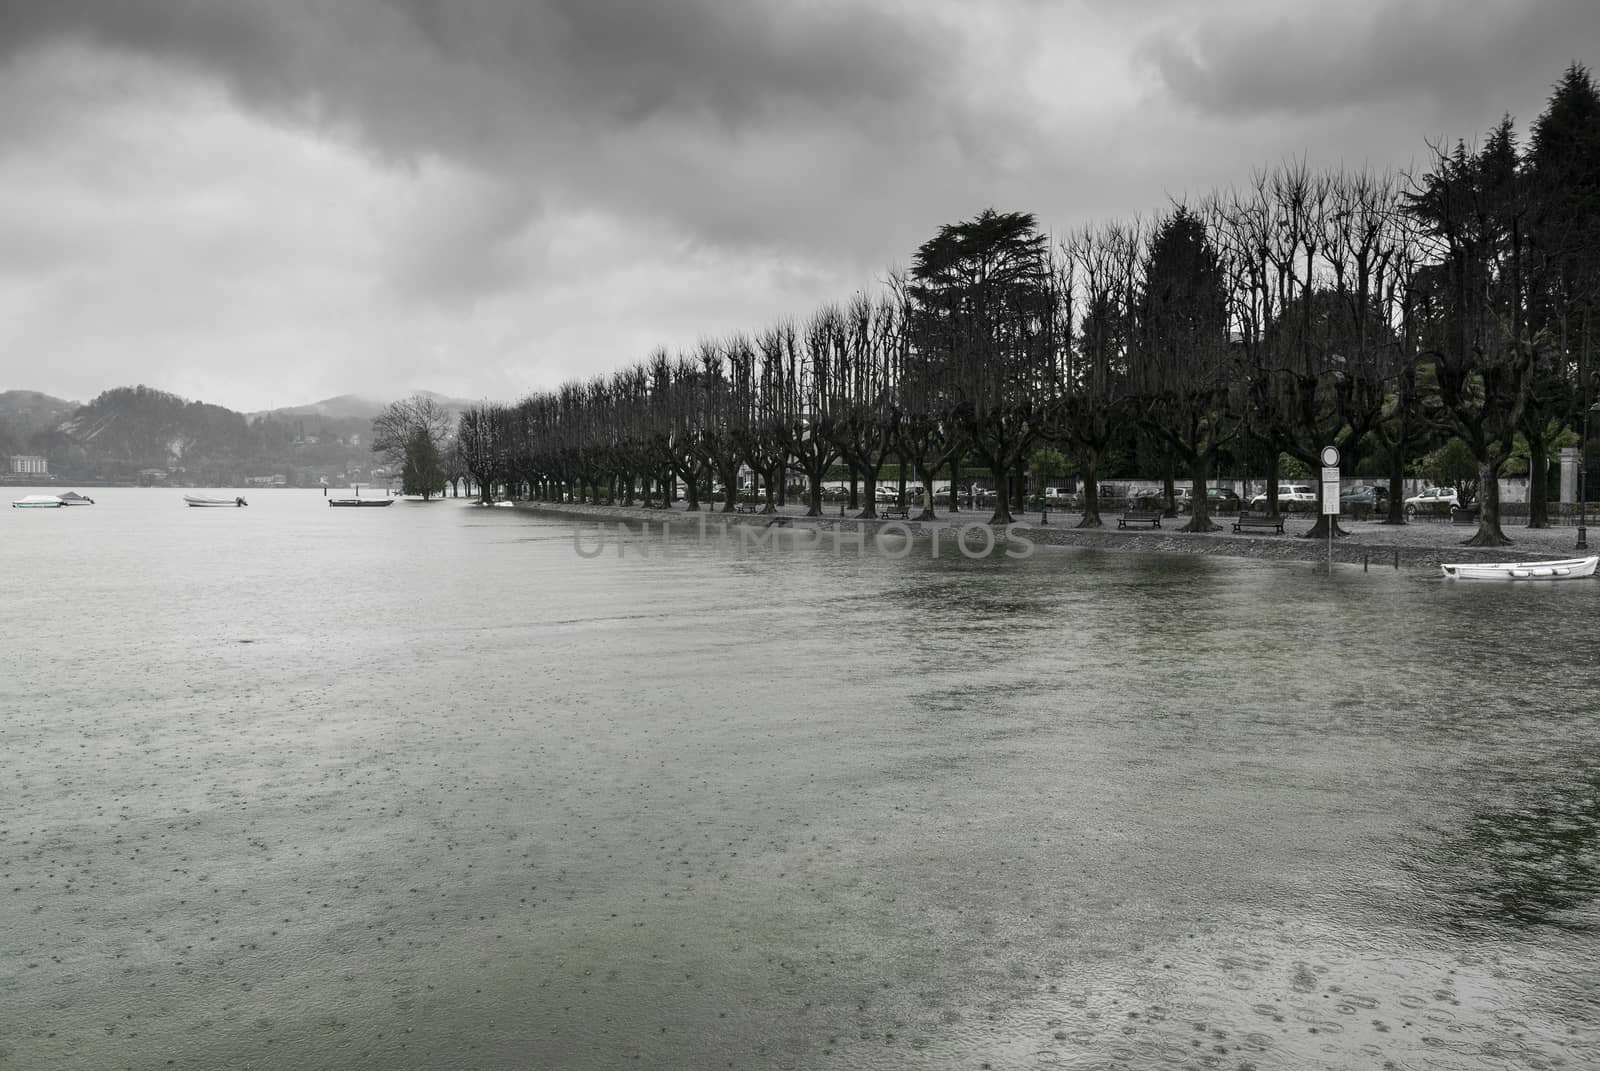 Lake Maggiore overflow in Angera, Varese by Mdc1970